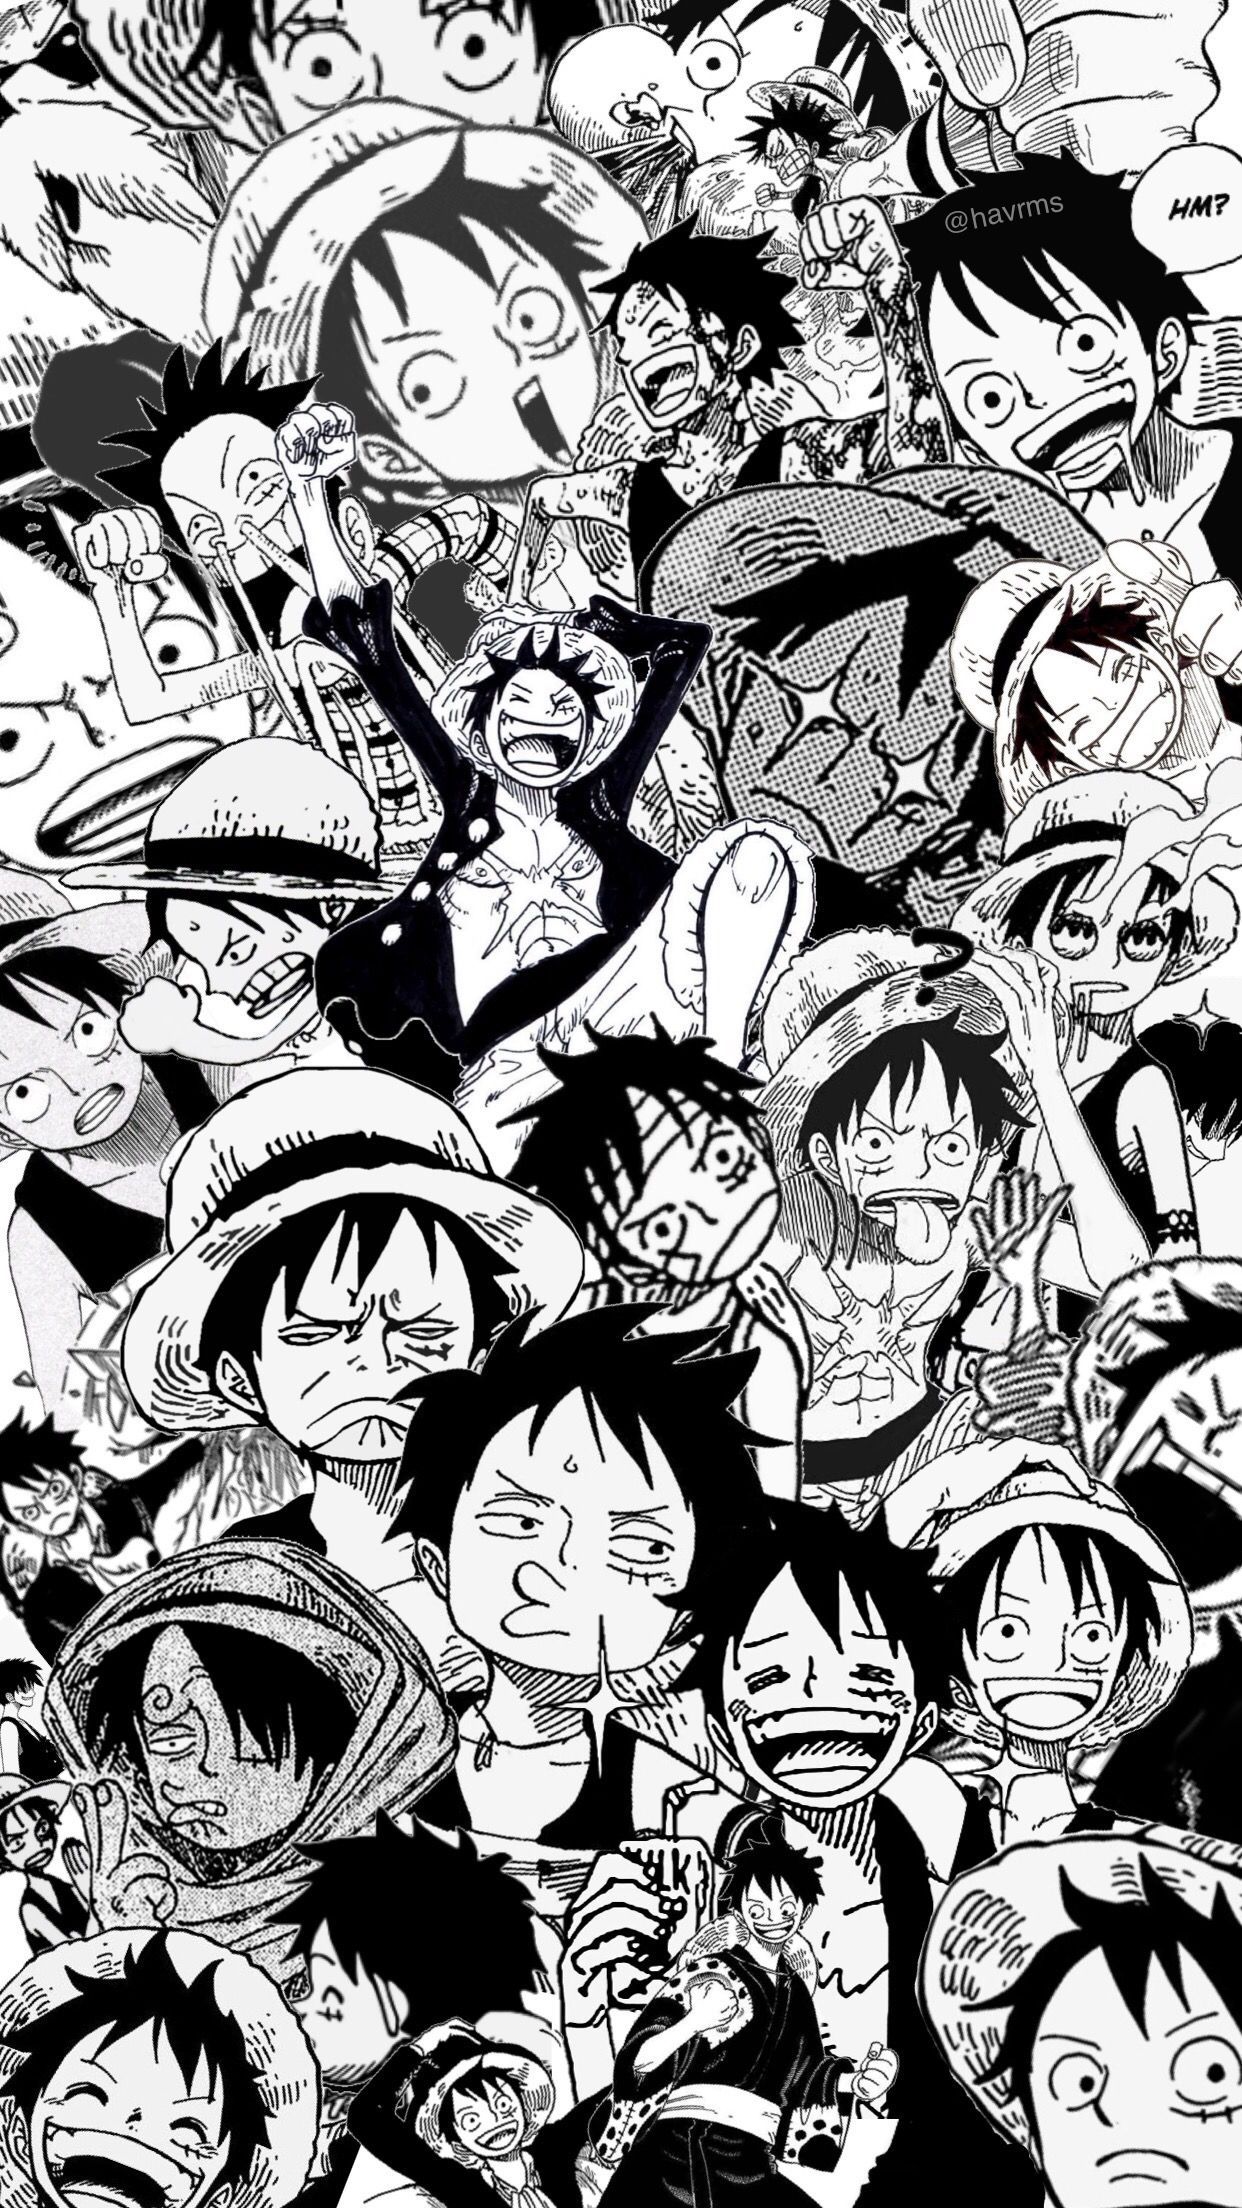 Another Luffy wallpaper! -formatted wallpaper size for iPhone and equivalent >Follow for more! ✨ #onepiece #luffy #monkey em 2020. Animes wallpaper, Estampas, Desenho